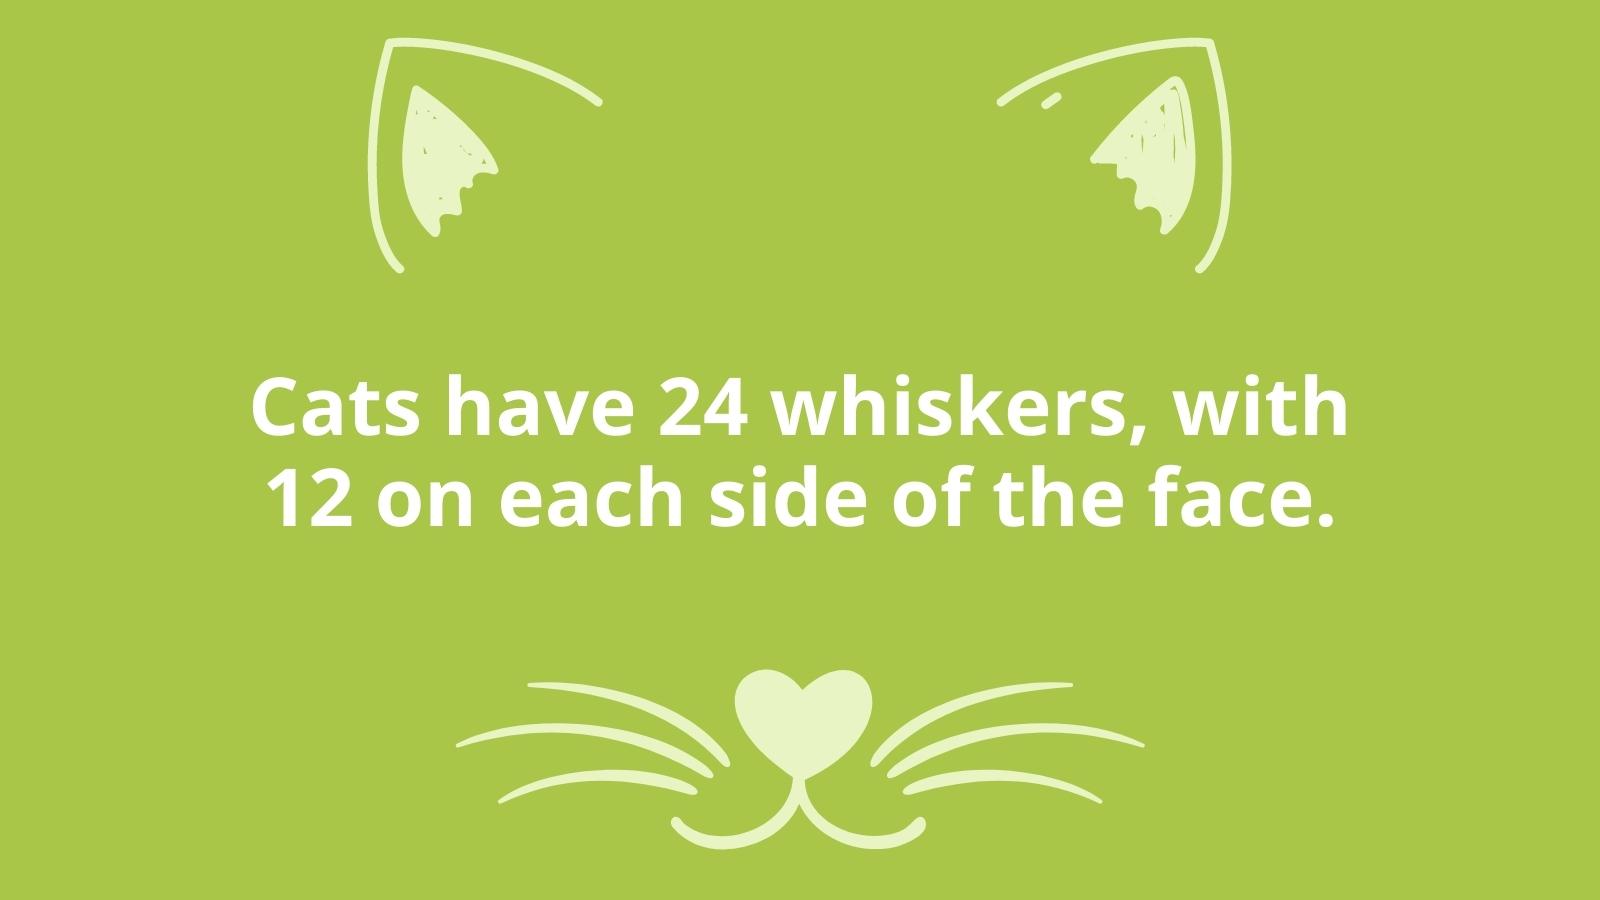 Cats have 24 whiskers, with 12 on each side of their face.- example of educational brain break- sharing fun facts